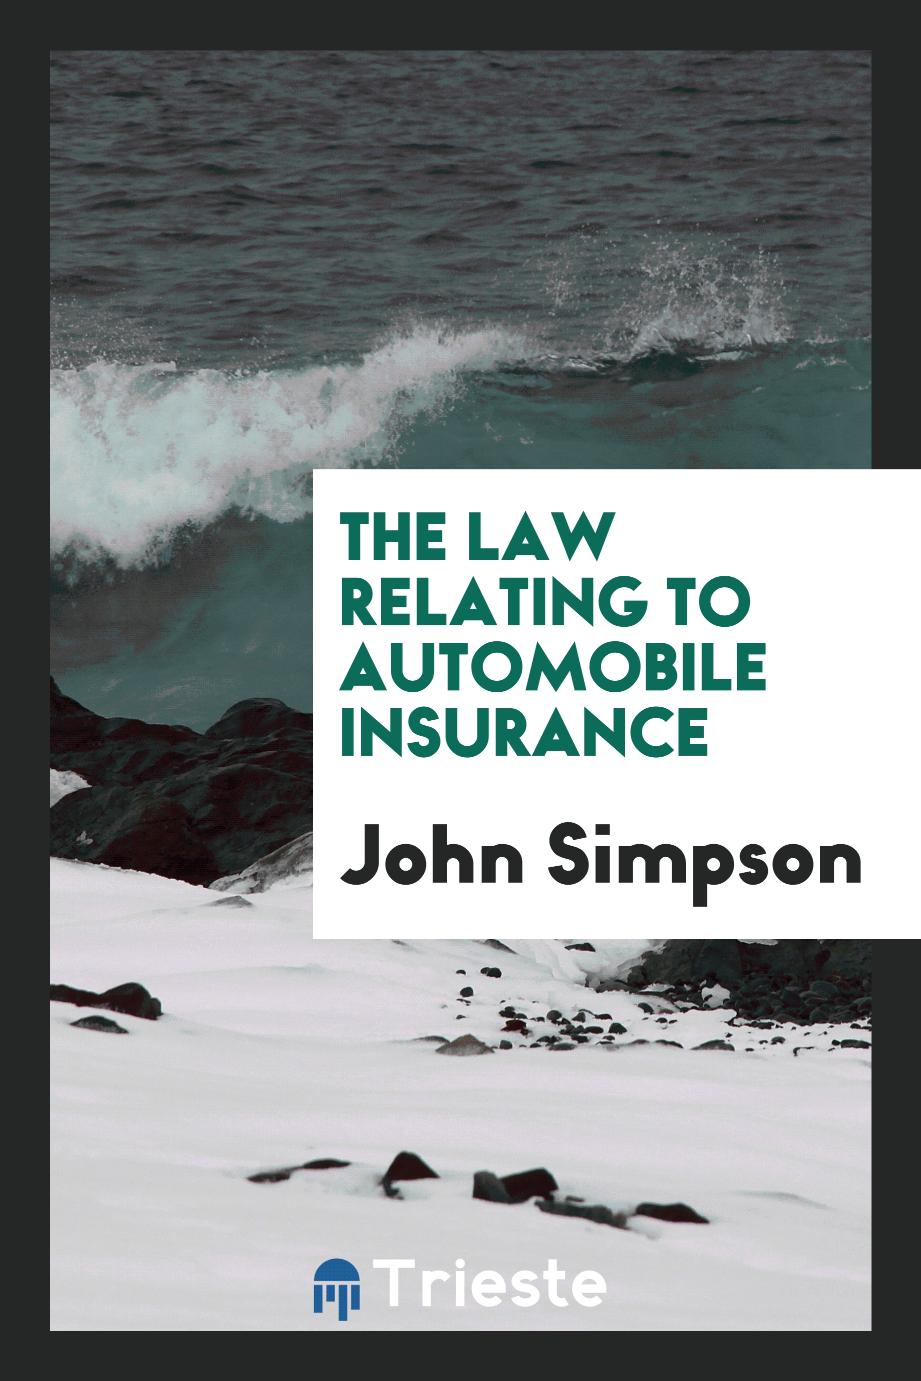 The law relating to automobile insurance